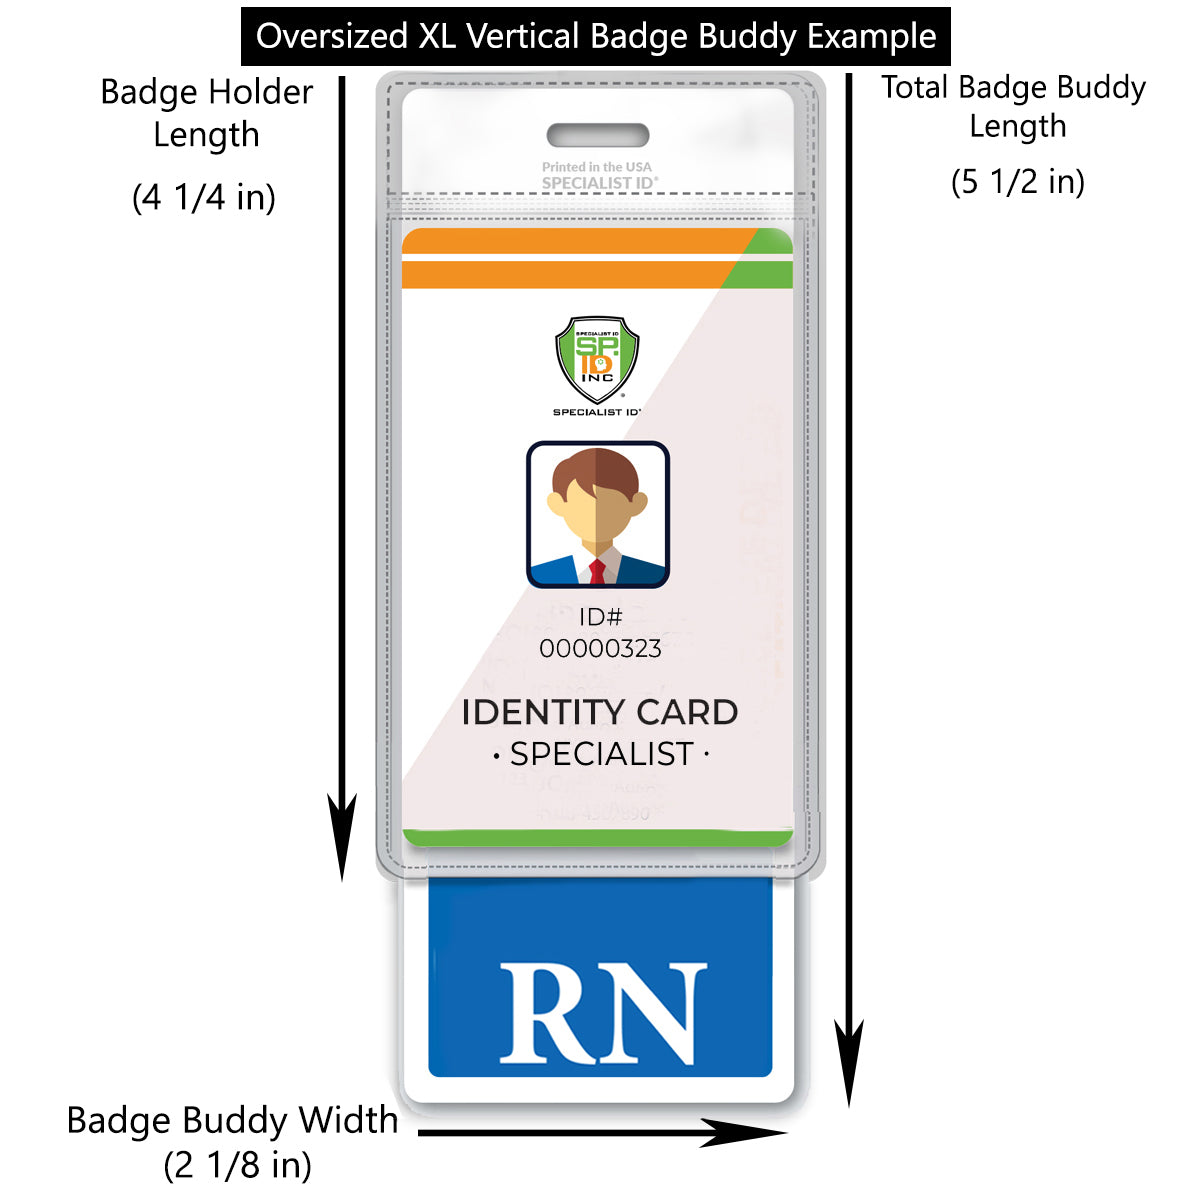 Registered Nurse Horizontal Badge Buddy with blue border and more